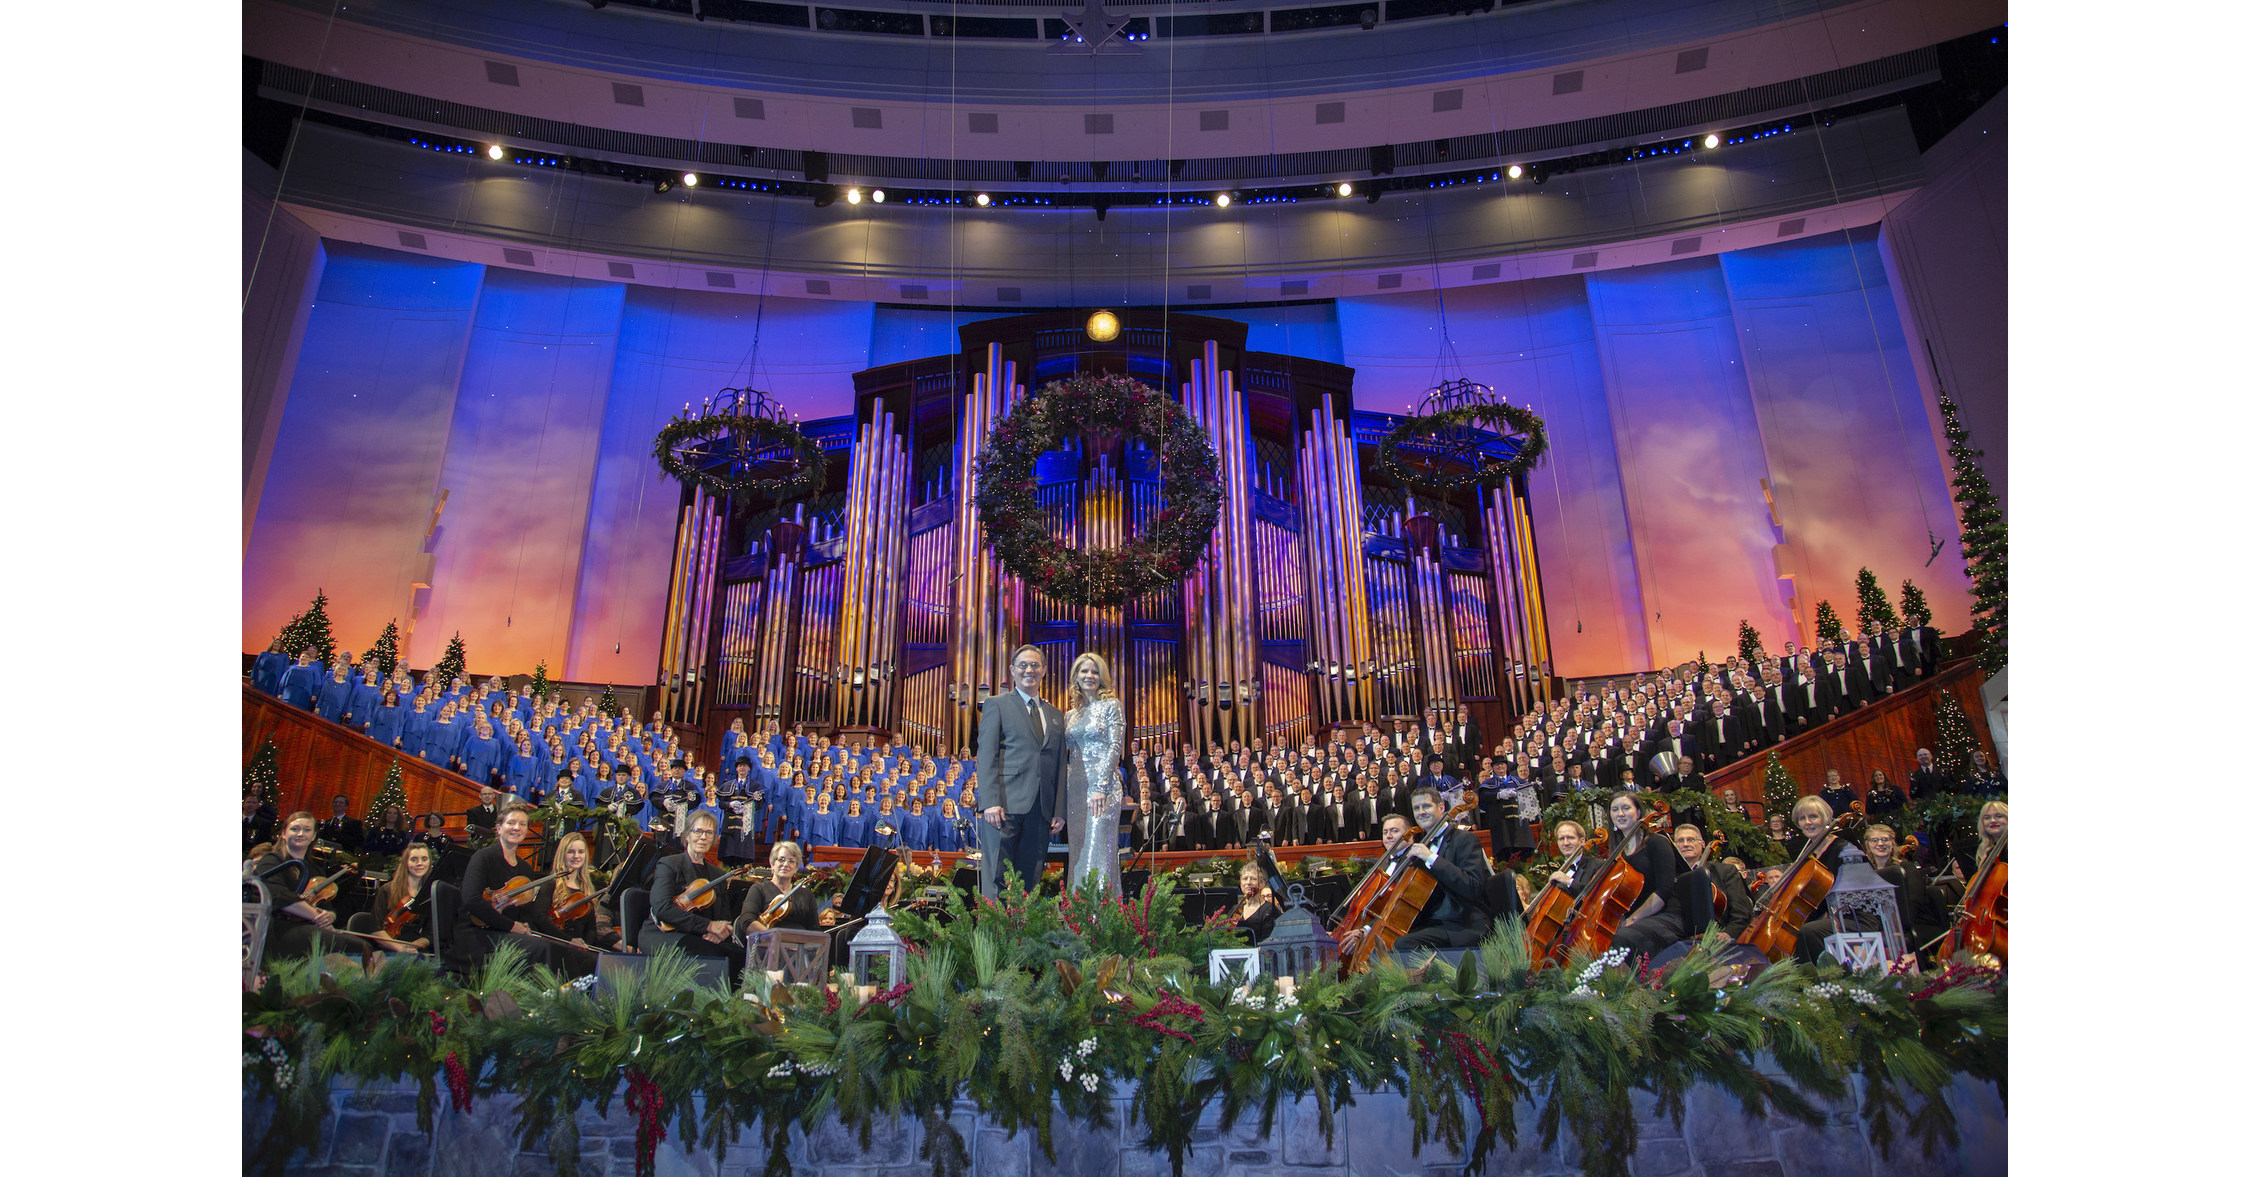 'Christmas with The Tabernacle Choir' featuring Kelli O'Hara and